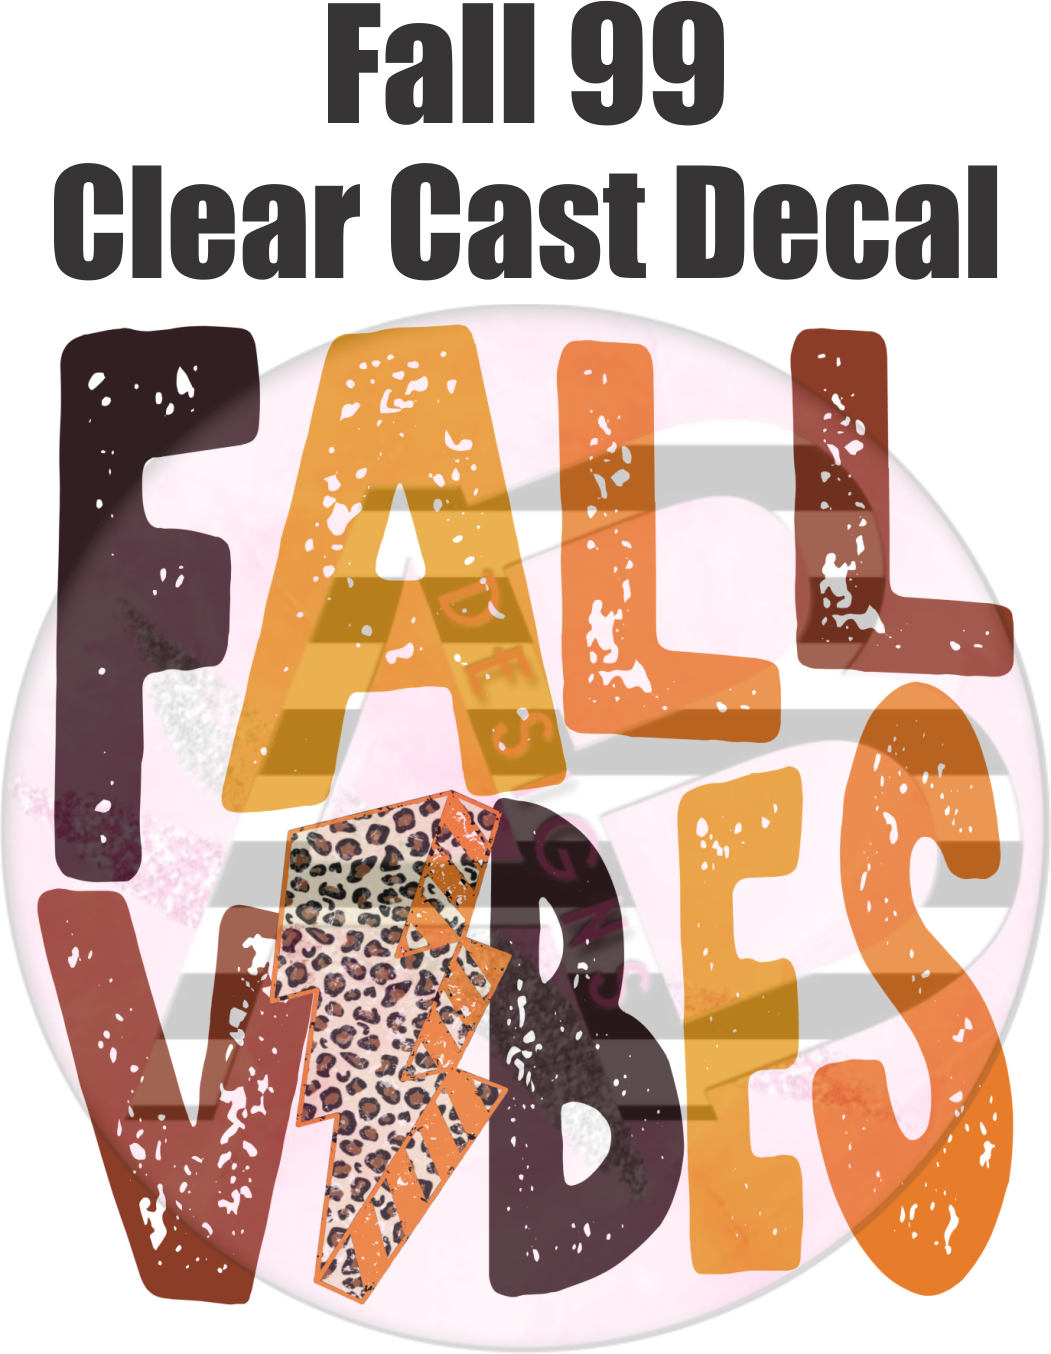 Fall 99 - Clear Cast Decal